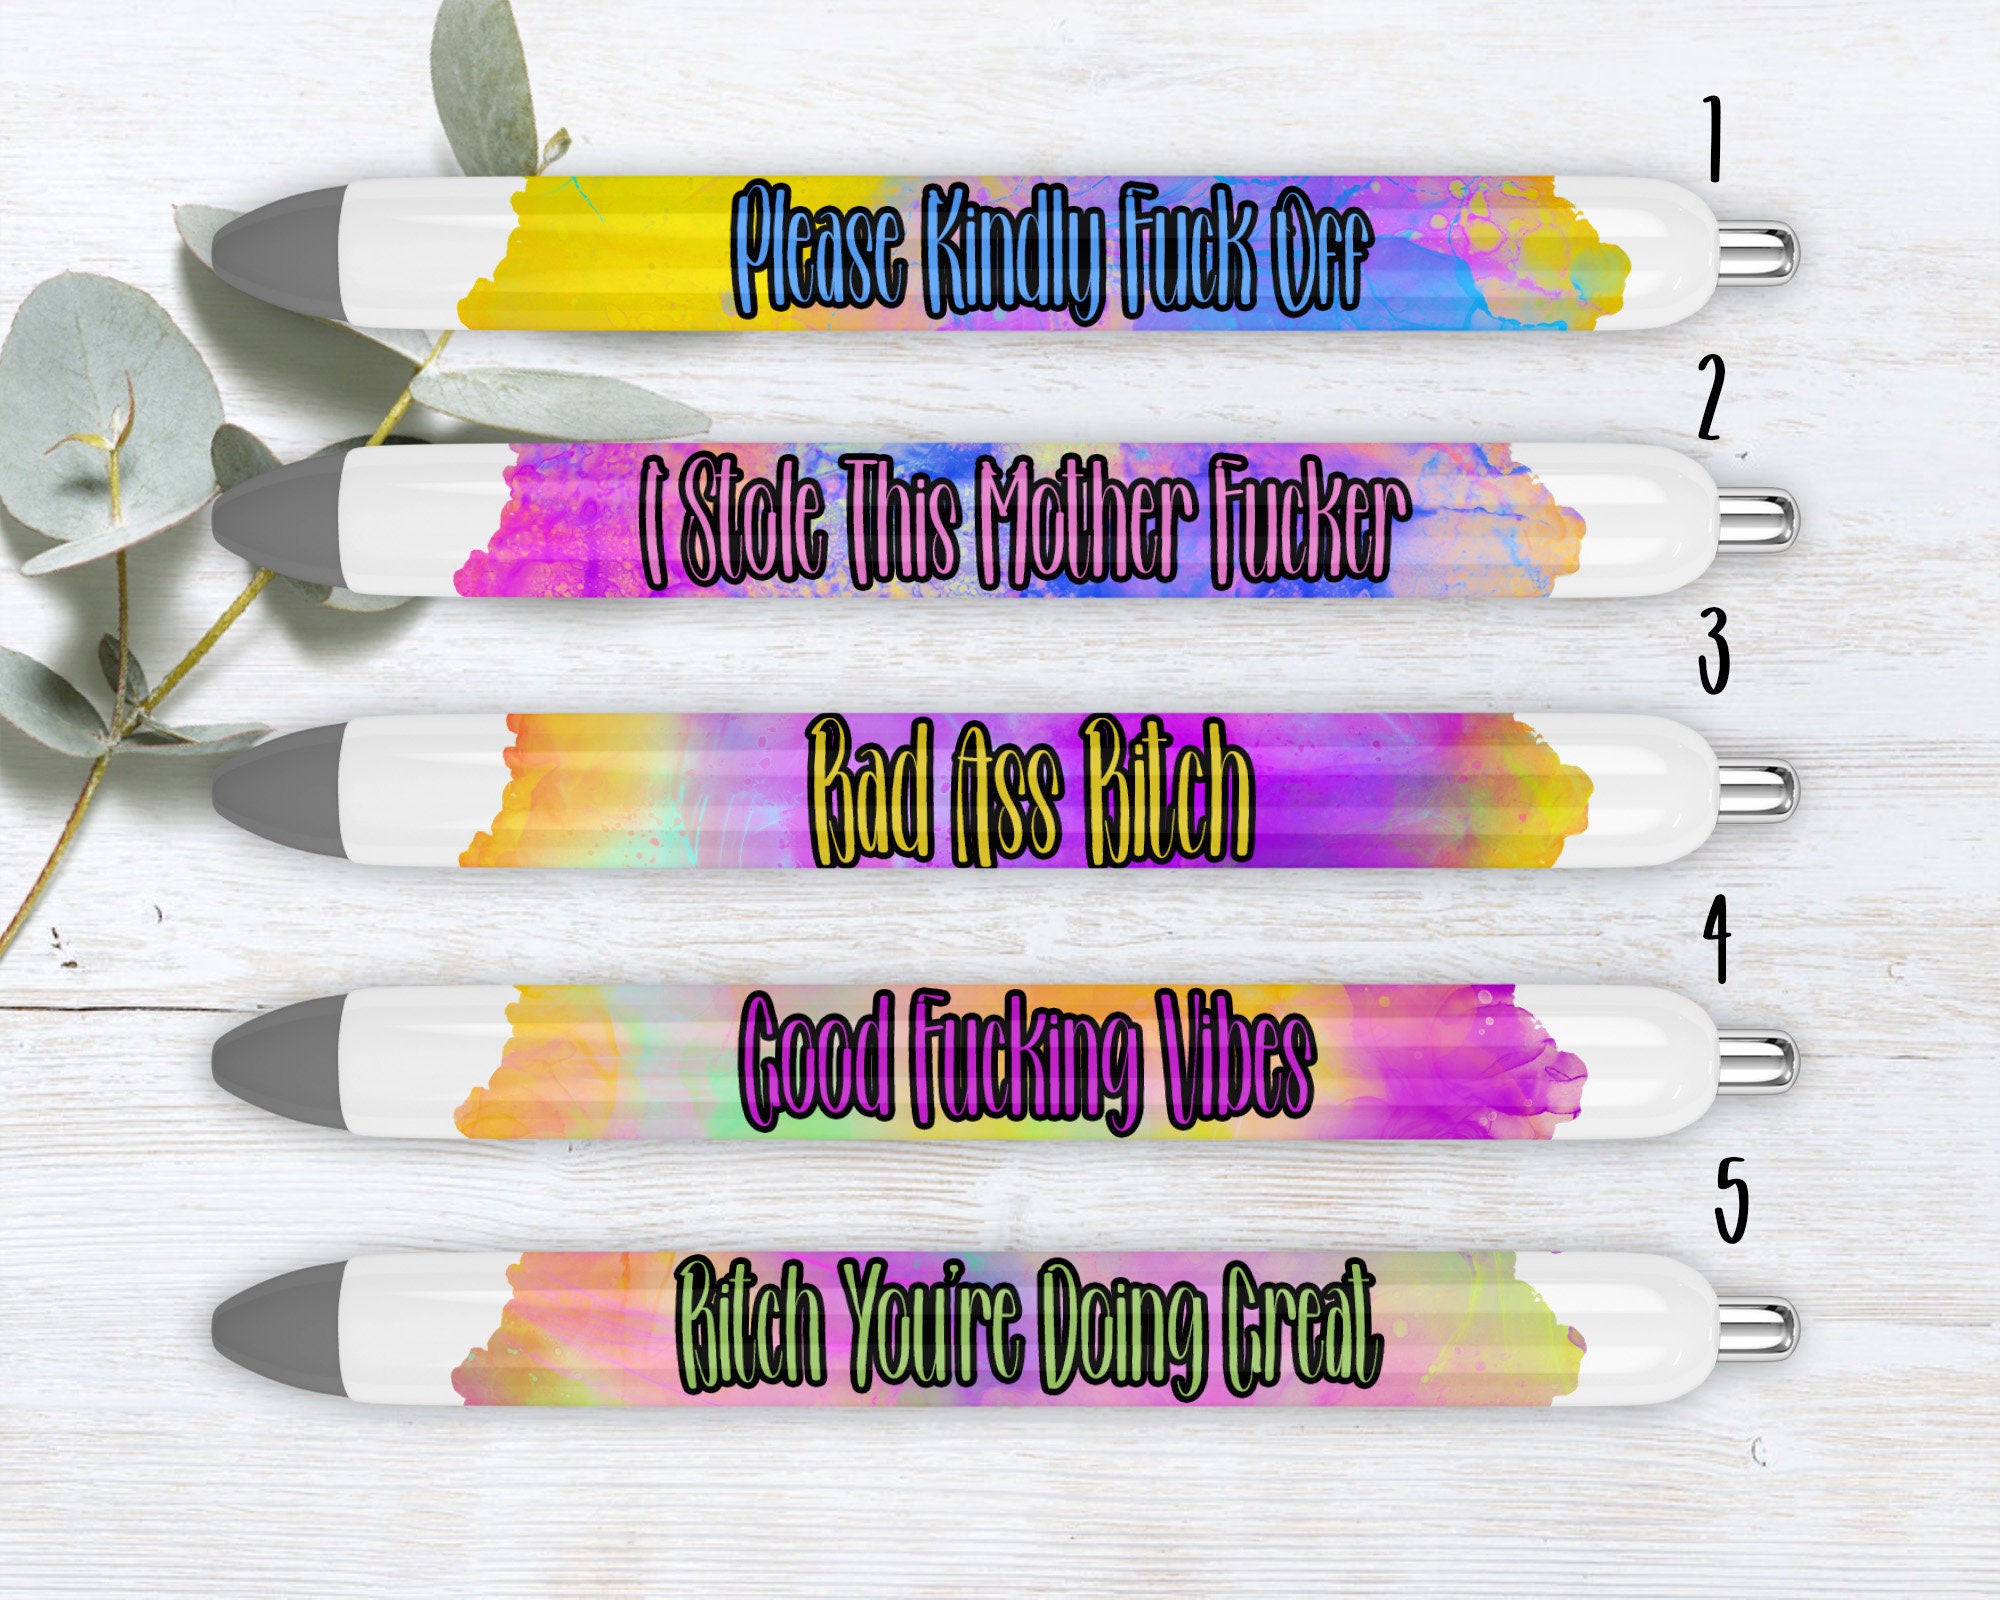 GetBullish Set Of 5 Sweary Fck Cussing Gel Pens, Multicolor, Snarky Novelty  Office Supplies, Sassy Gifts For Friends, Co-Workers, Boss